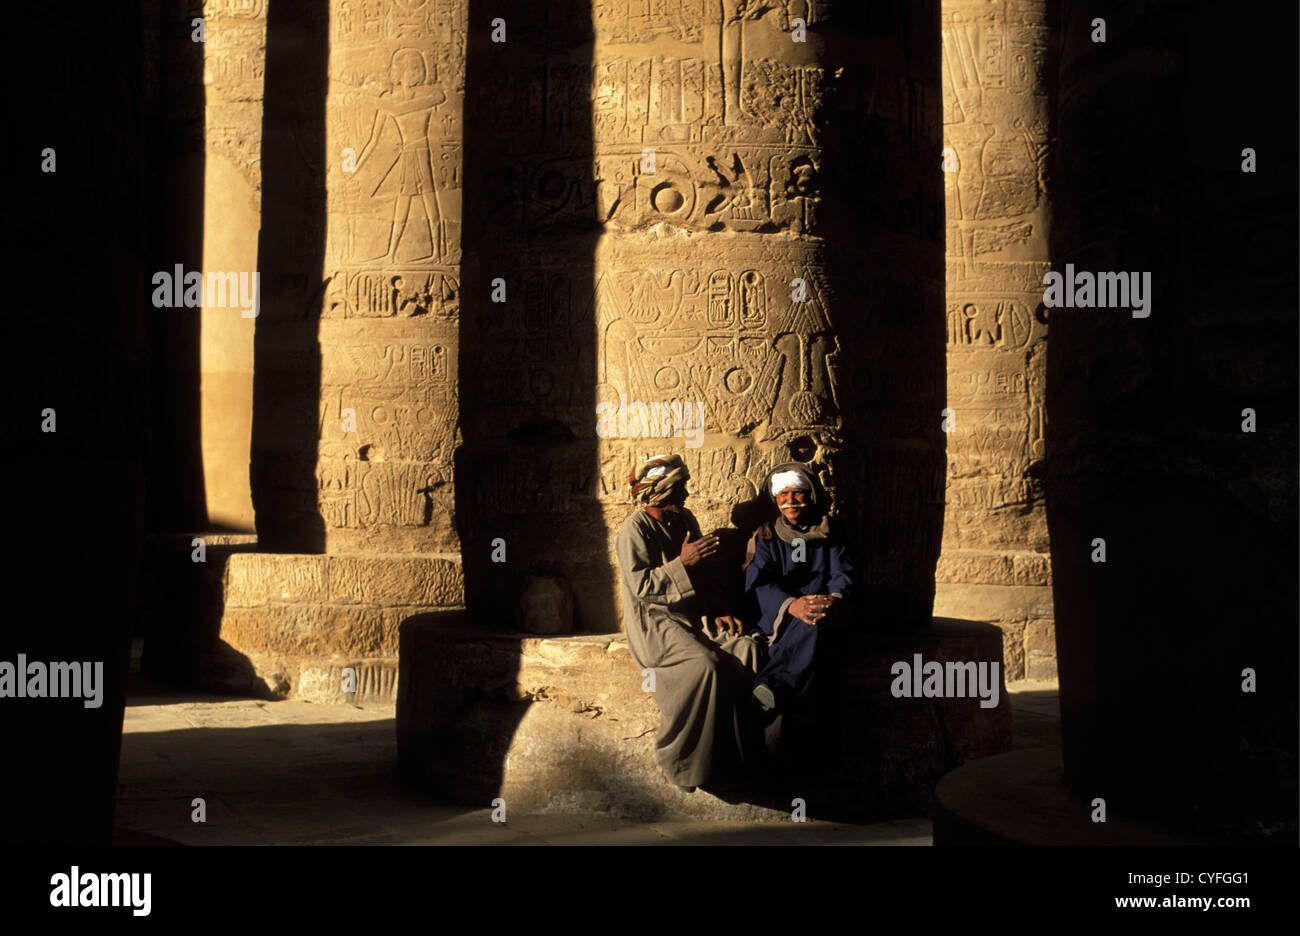 Egypt, Nile river, Luxor, East Bank, Karnak Temple. Hypostall Hall. 'Forest' of giant papyrus-shaped columns. Guards Stock Photo